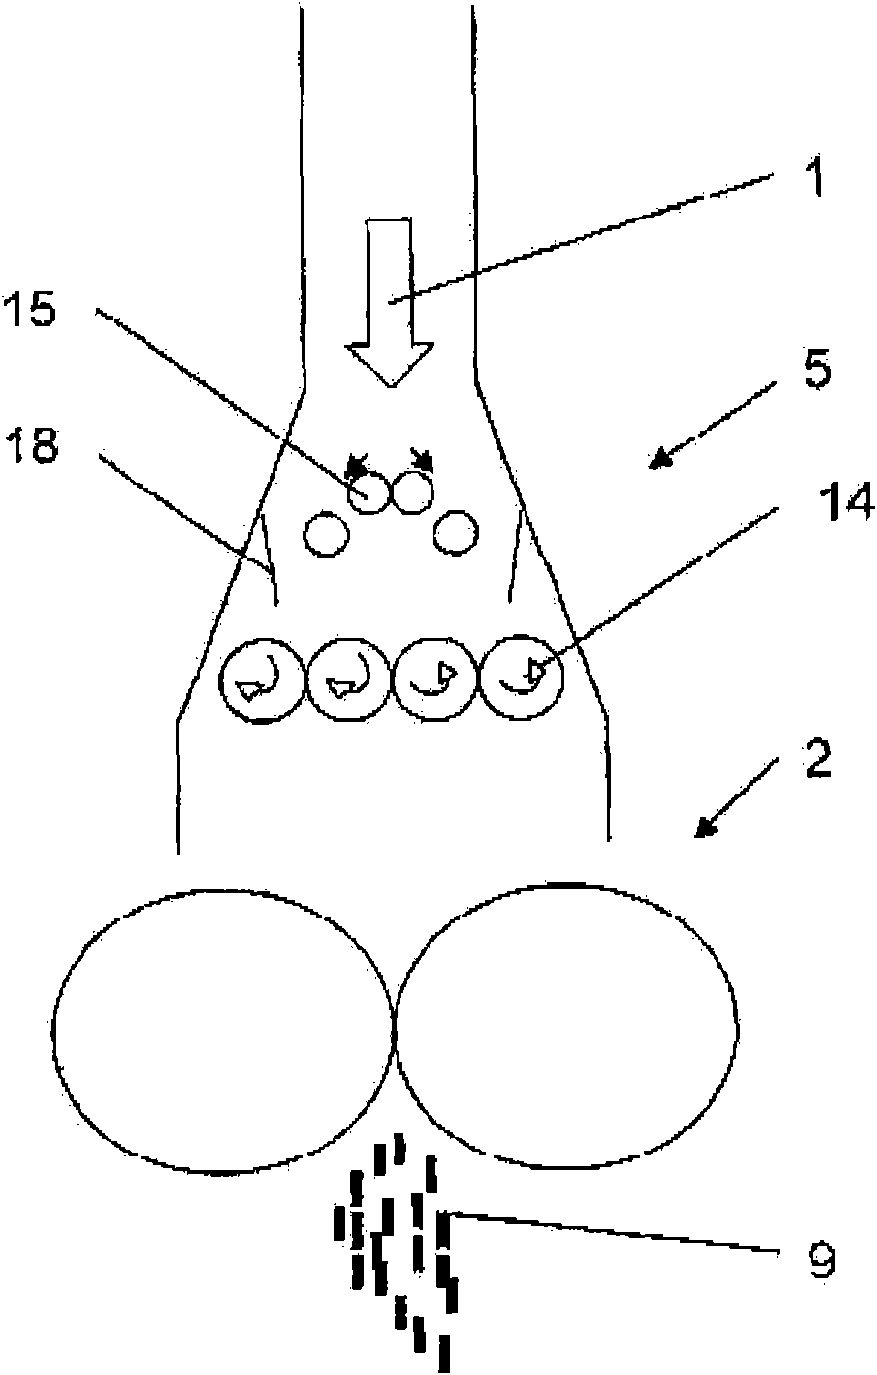 Method and assembly for producing pellets made of biomass in pelleting press for use as fuel in fireplaces